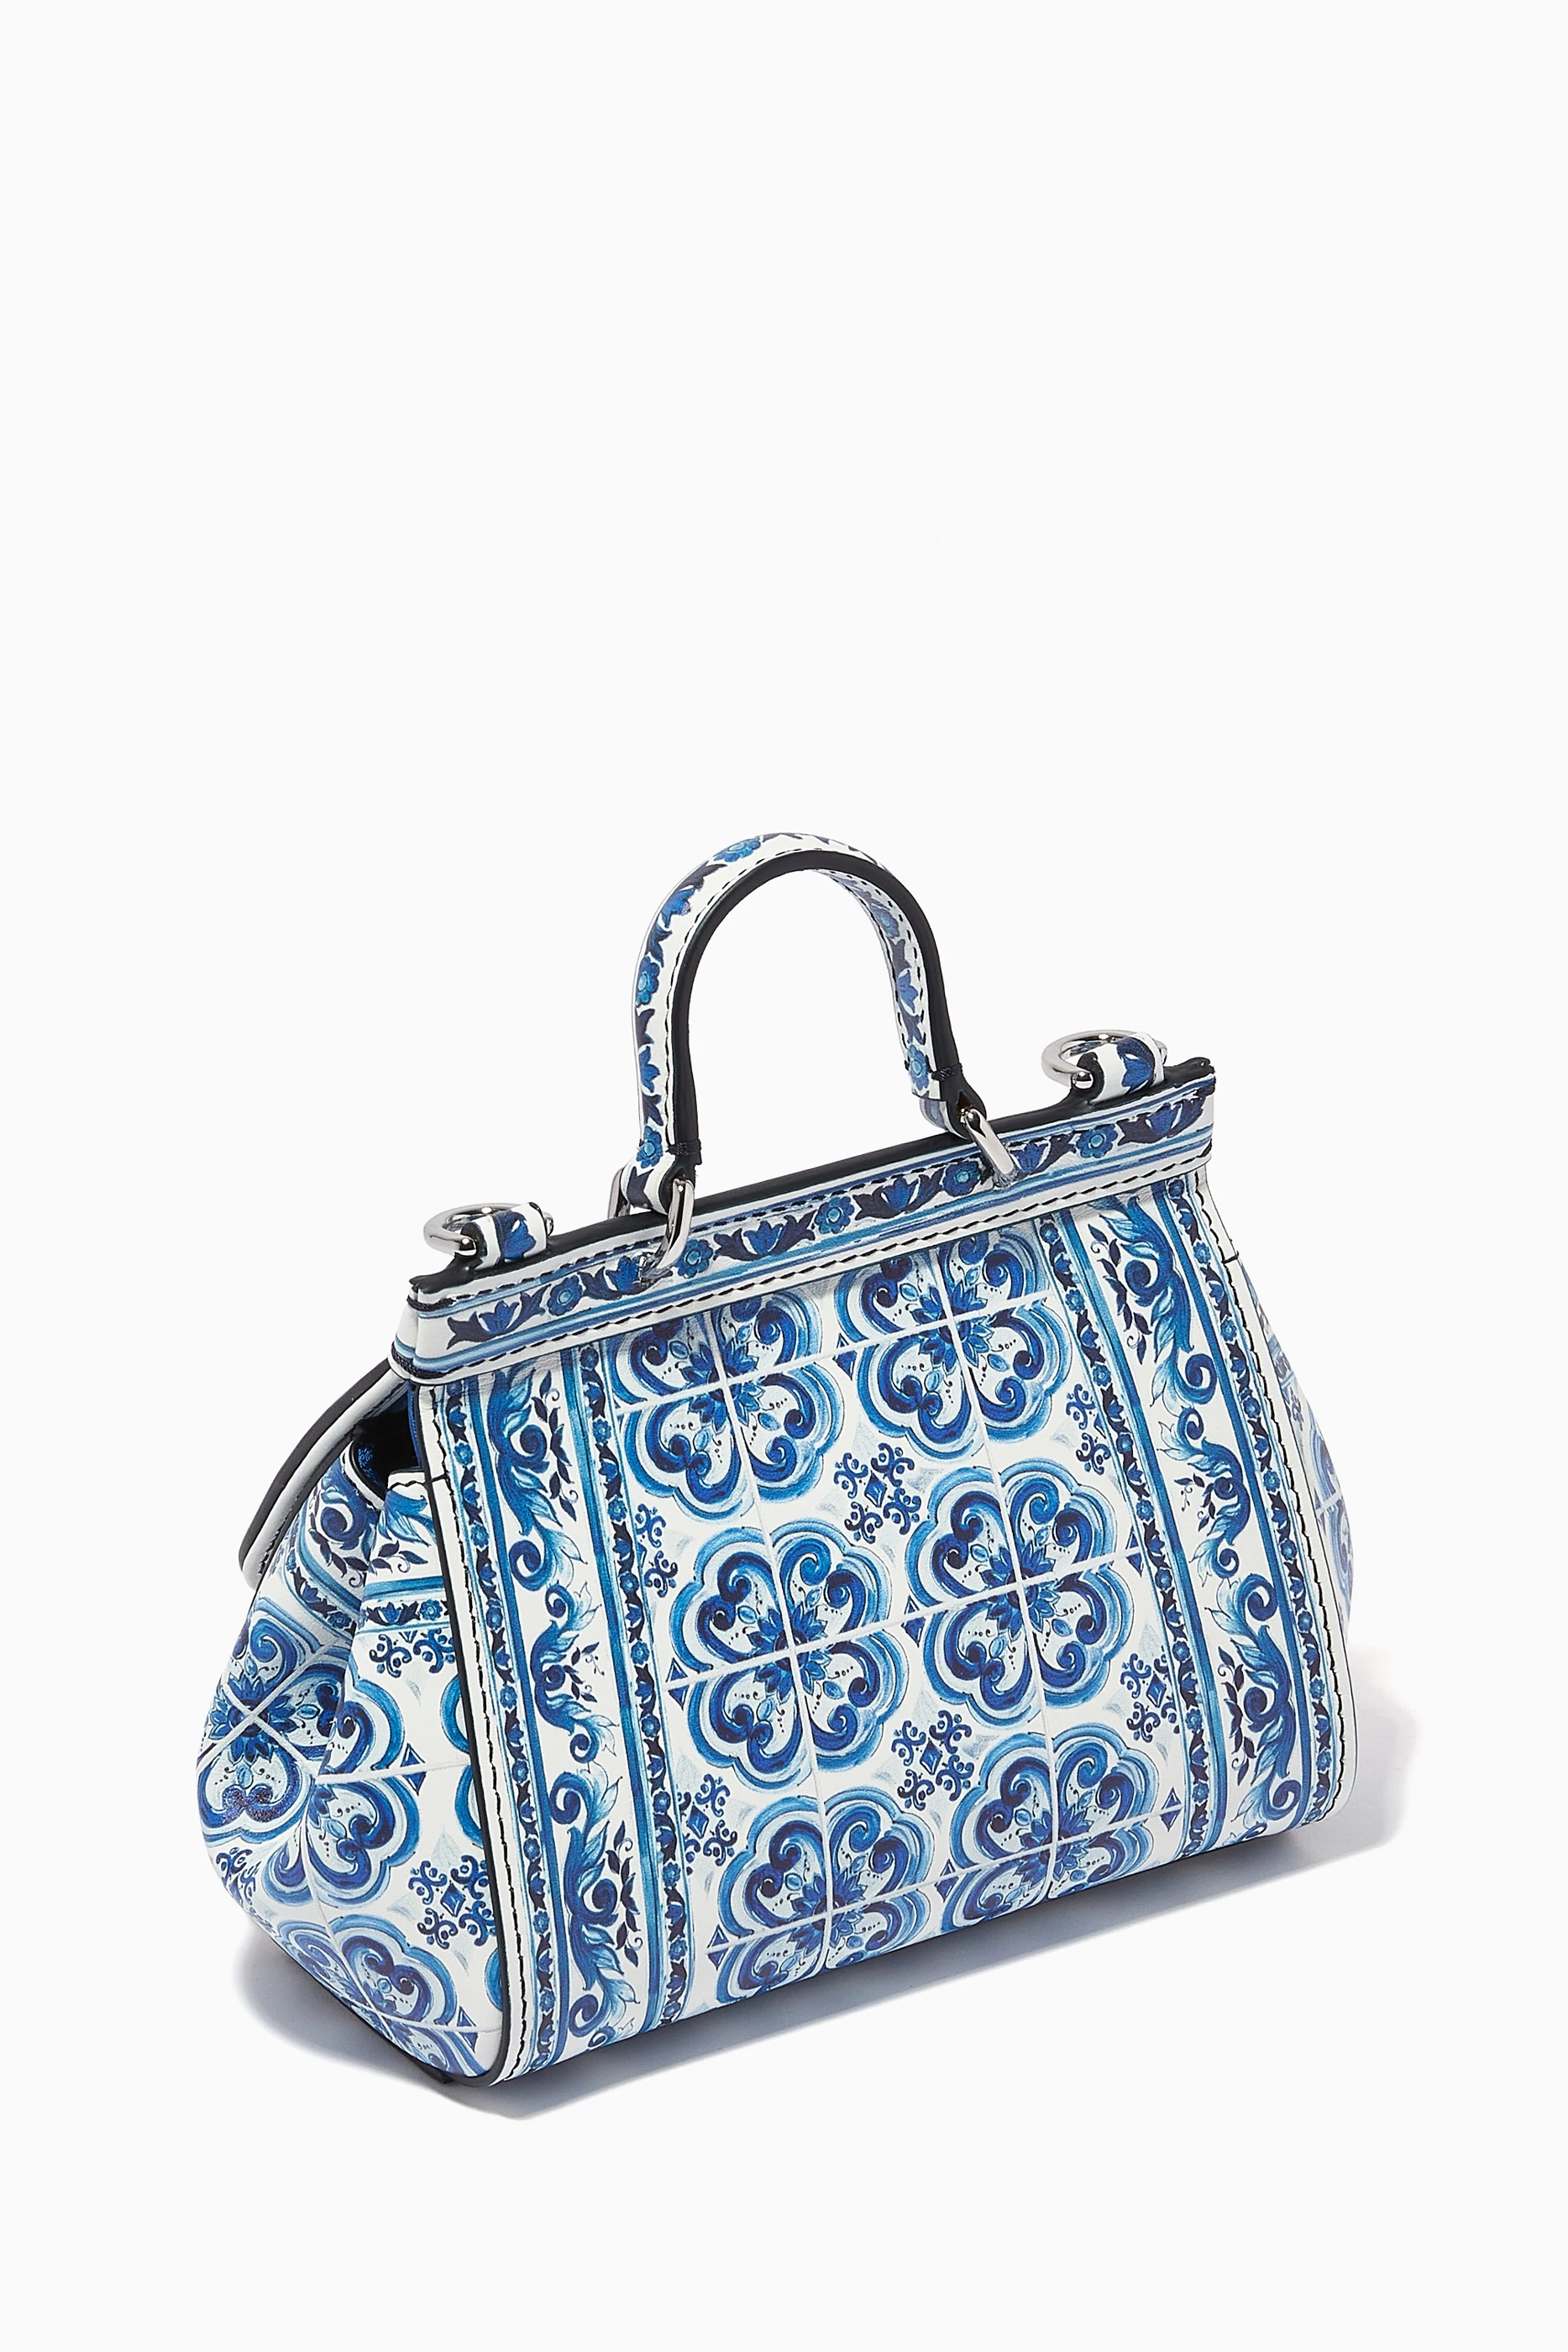 OUNASS - The Dolce Gabbana floral printed Miss Sicily Bag